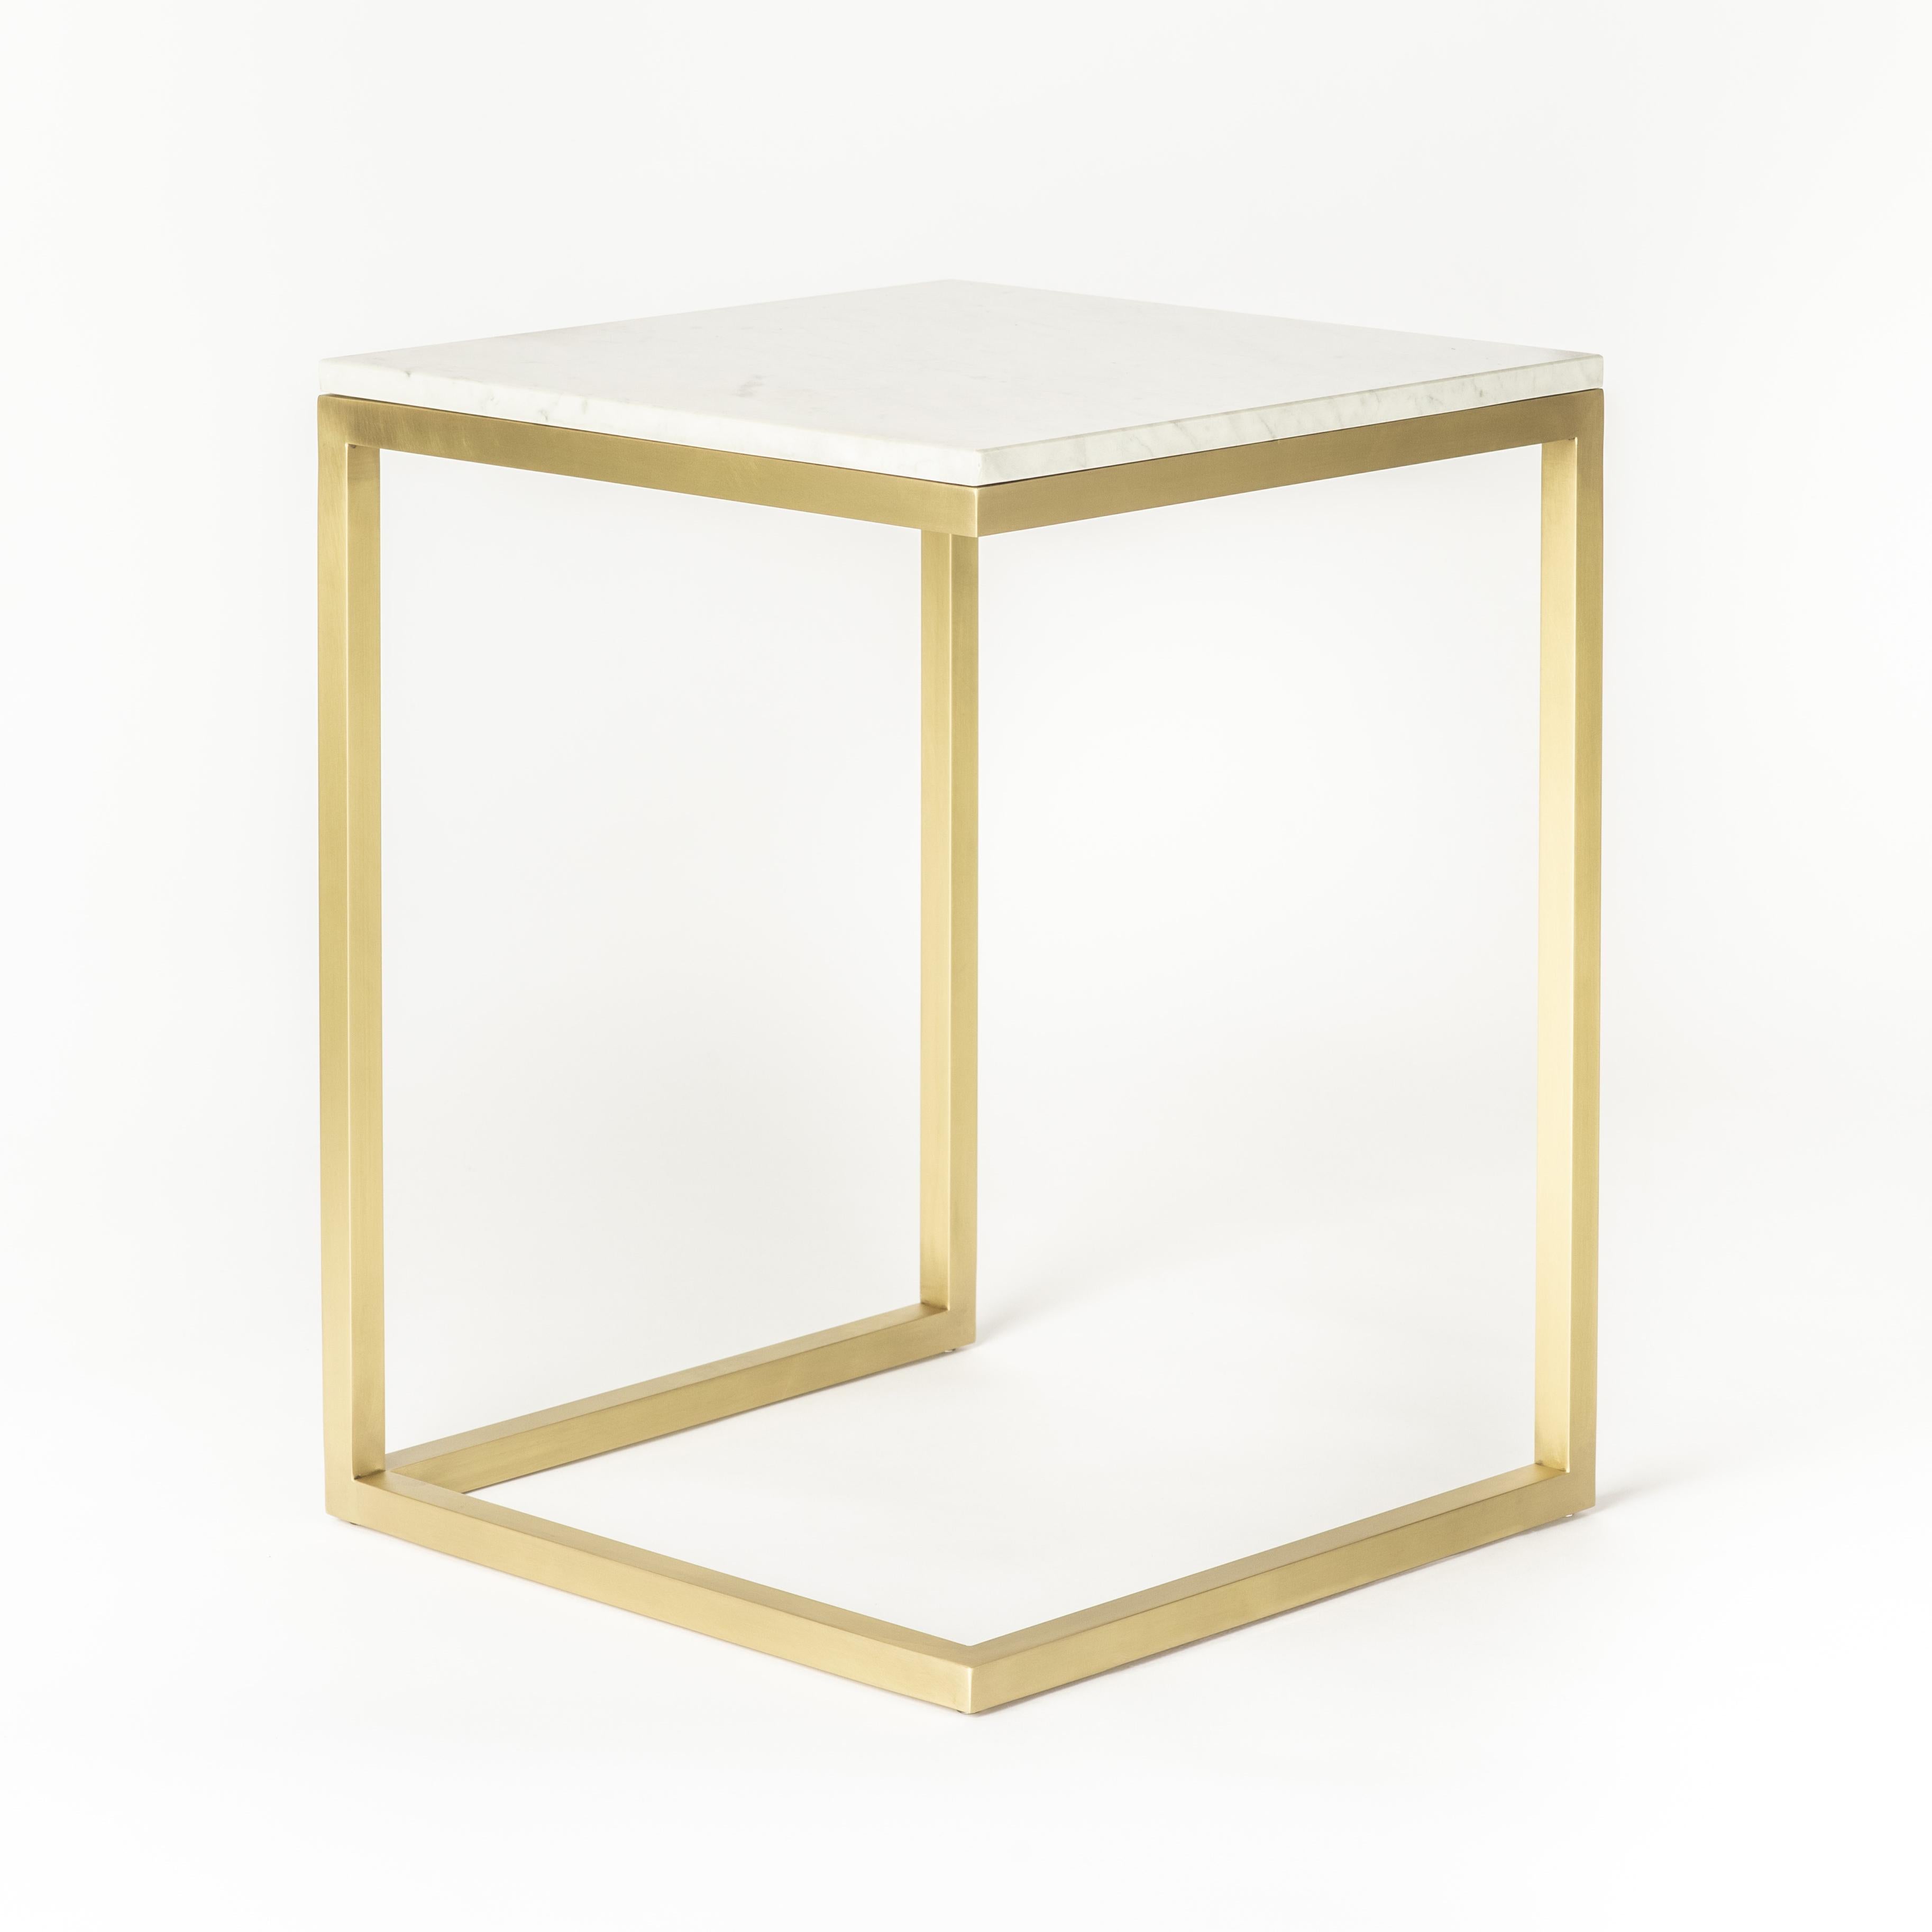 Esopo Modern Handmade Brass Side Table with White Carrara Marble Square Top (Moderne) im Angebot